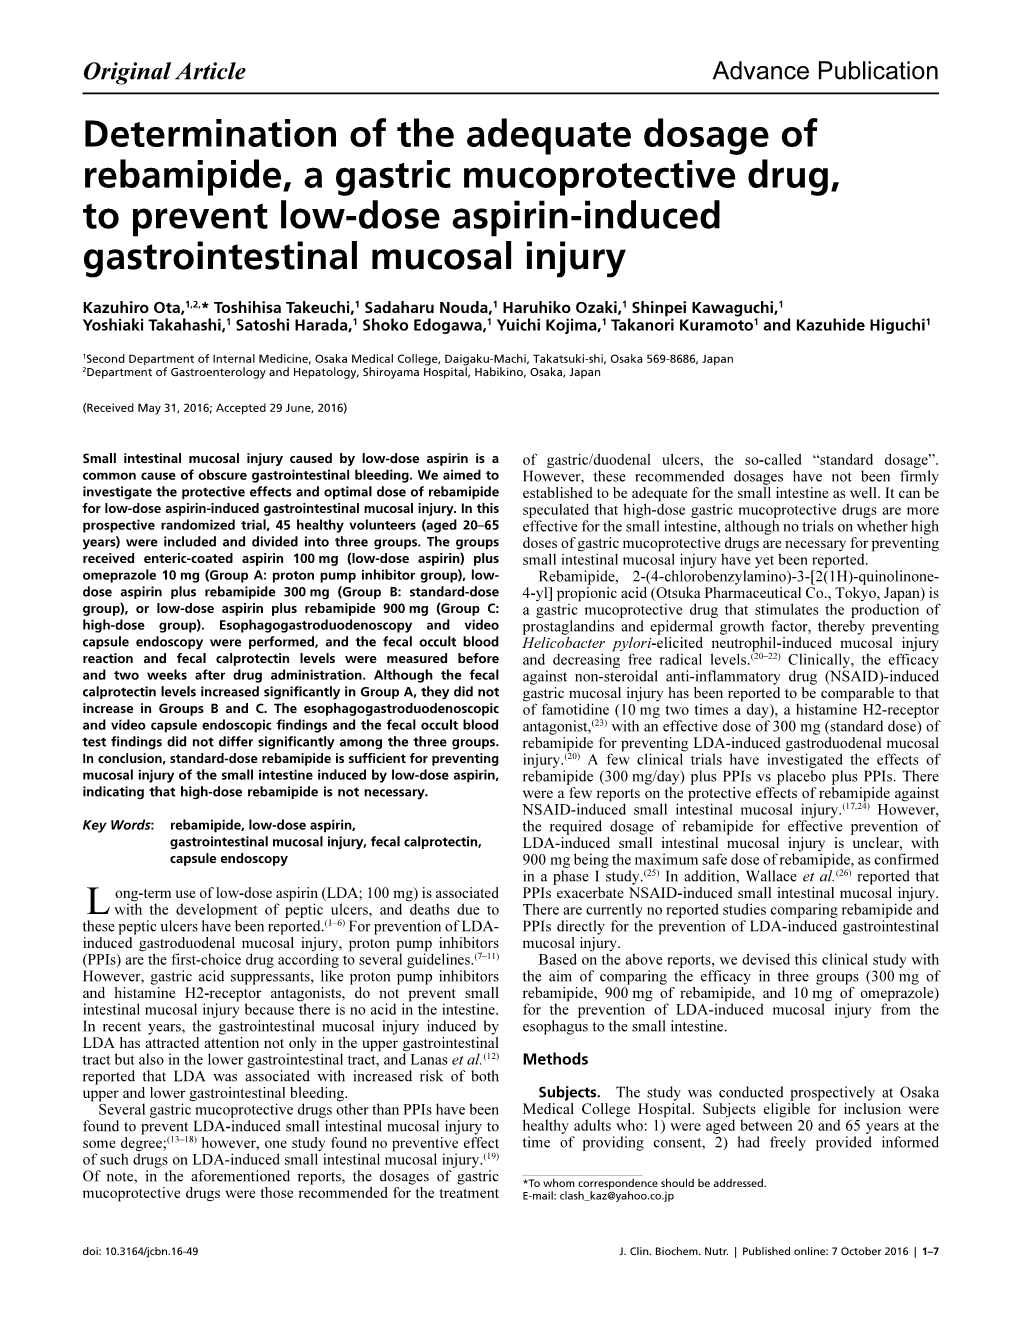 Determination of the Adequate Dosage of Rebamipide, a Gastric